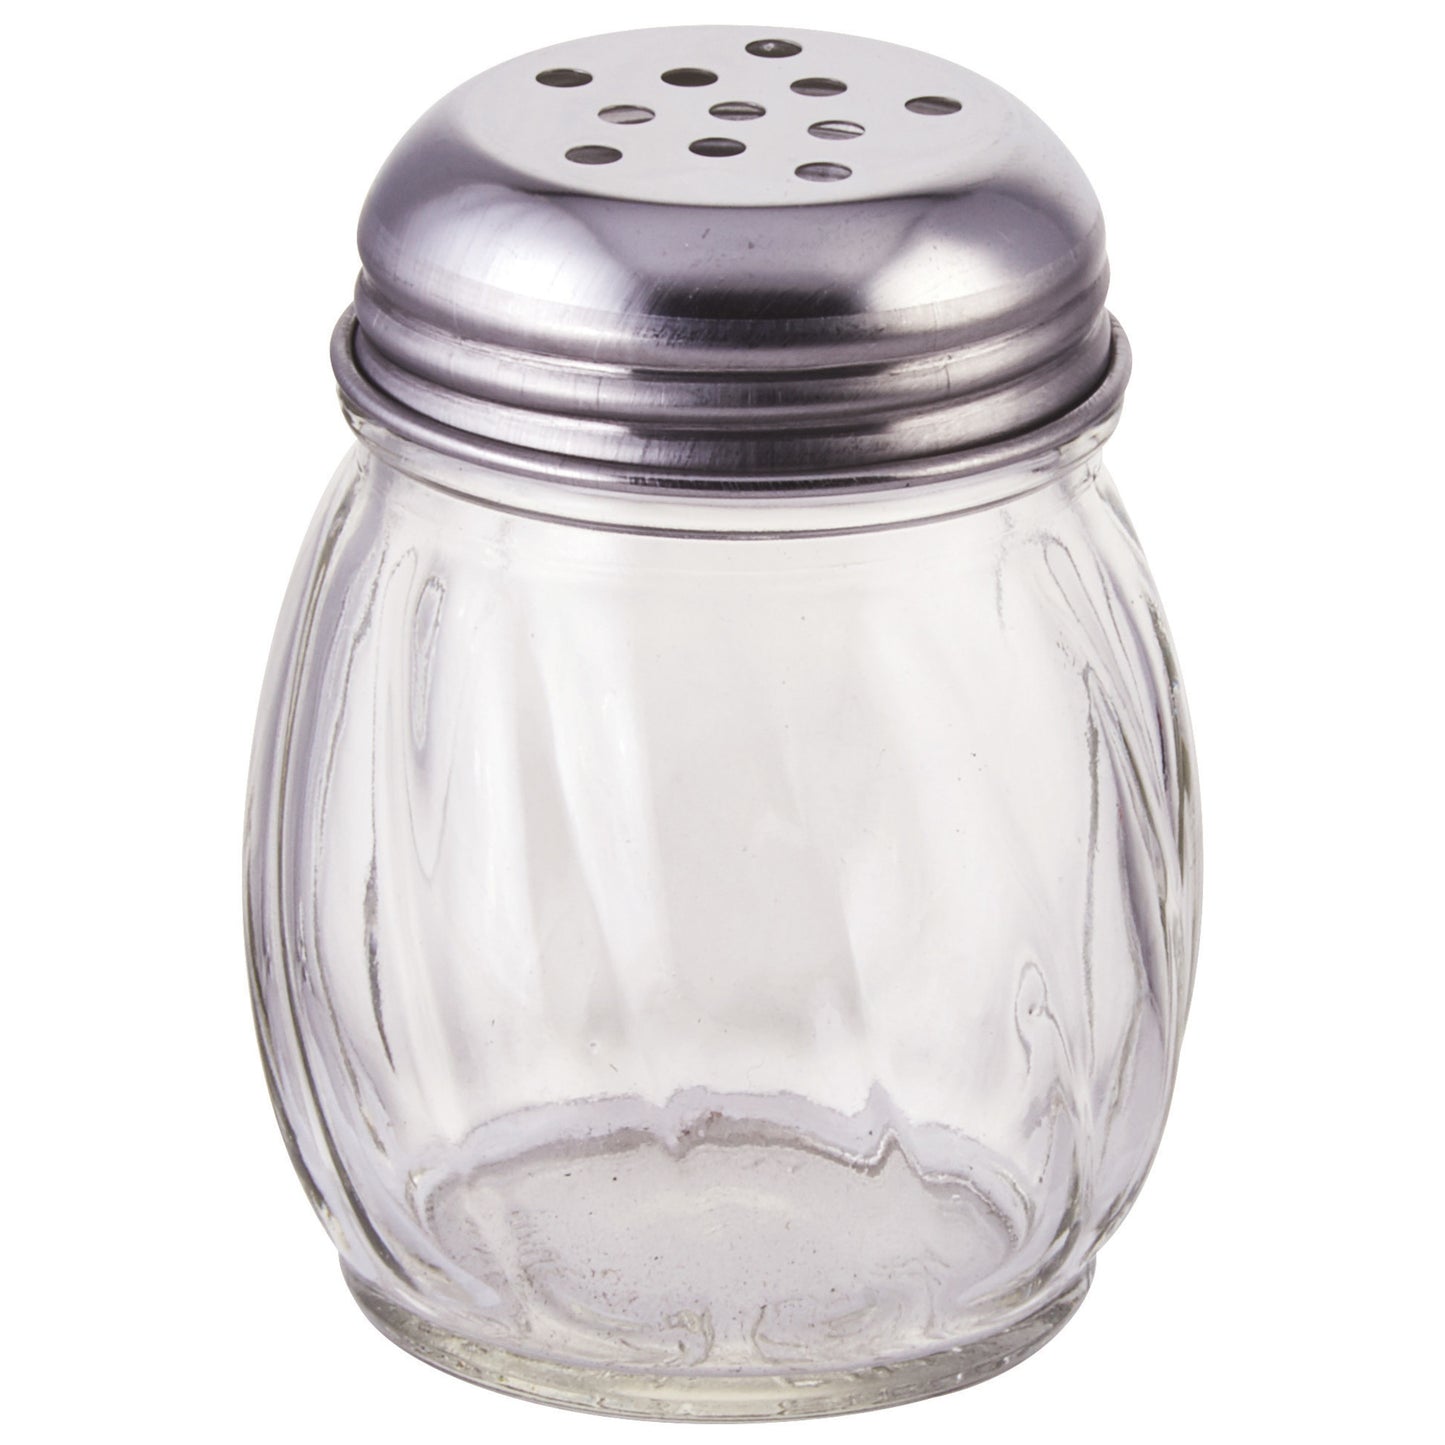 G-107 - Cheese Shakers, 6 oz - Perforated